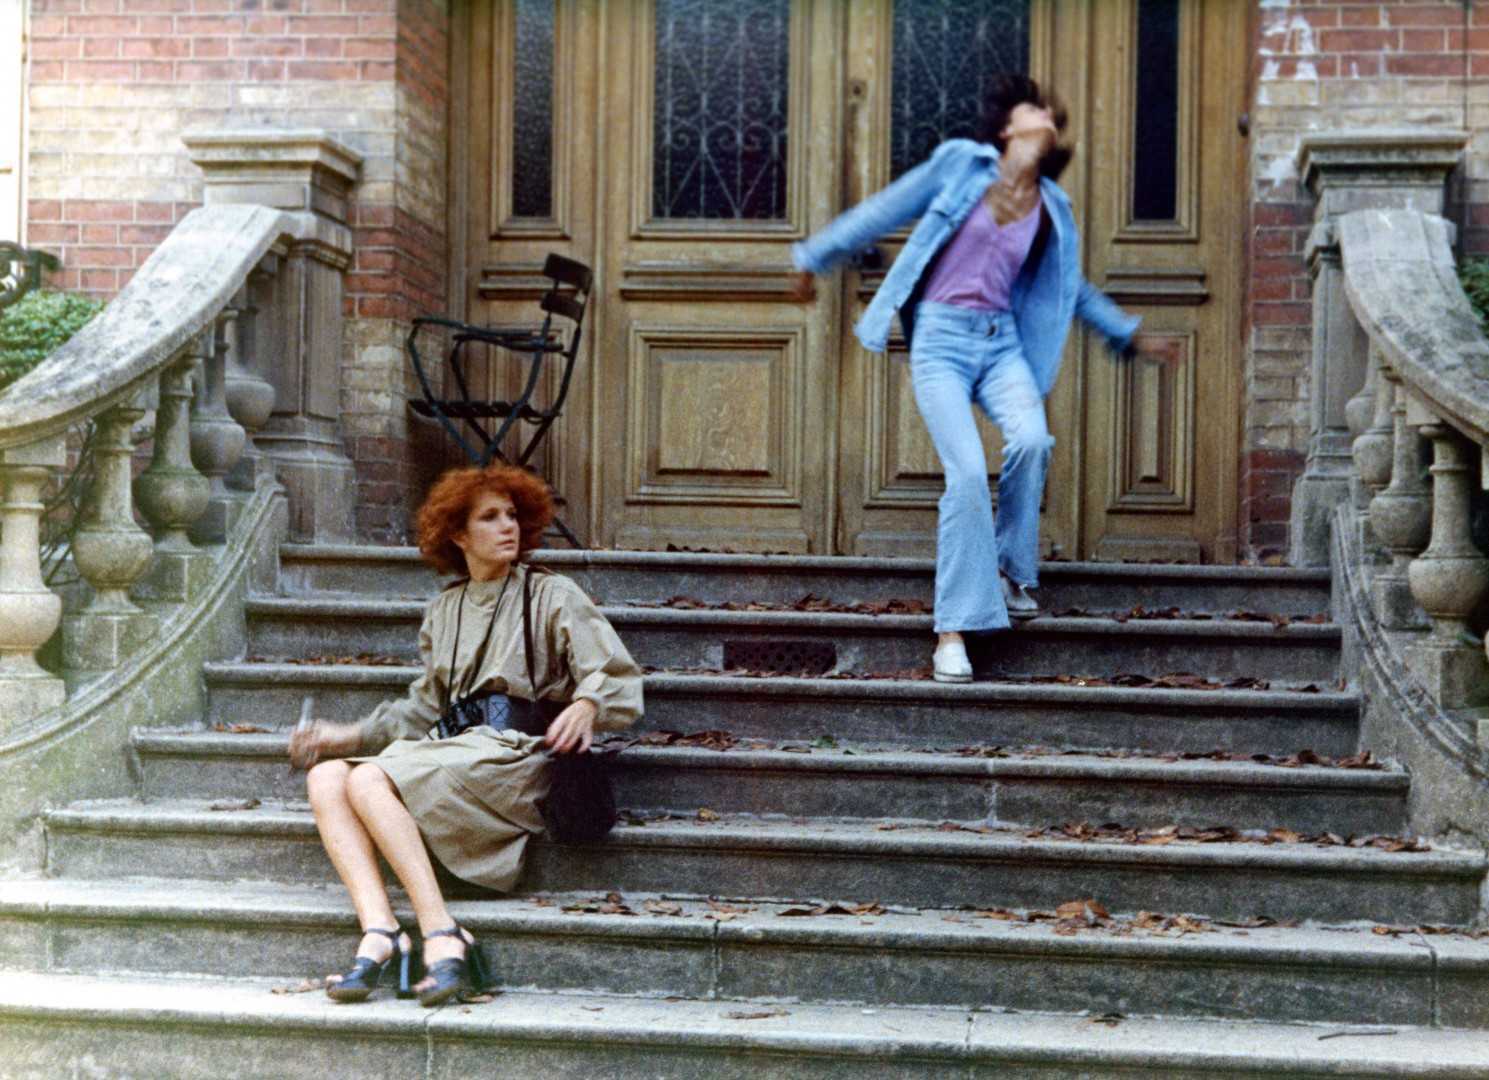 (l to r) Julie (Dominique Labourier) and Celine (Juliet Berto) outside the mysterious house in Celine and Julie Go Boating (1974)Celine and Julie Go Boating (1974)